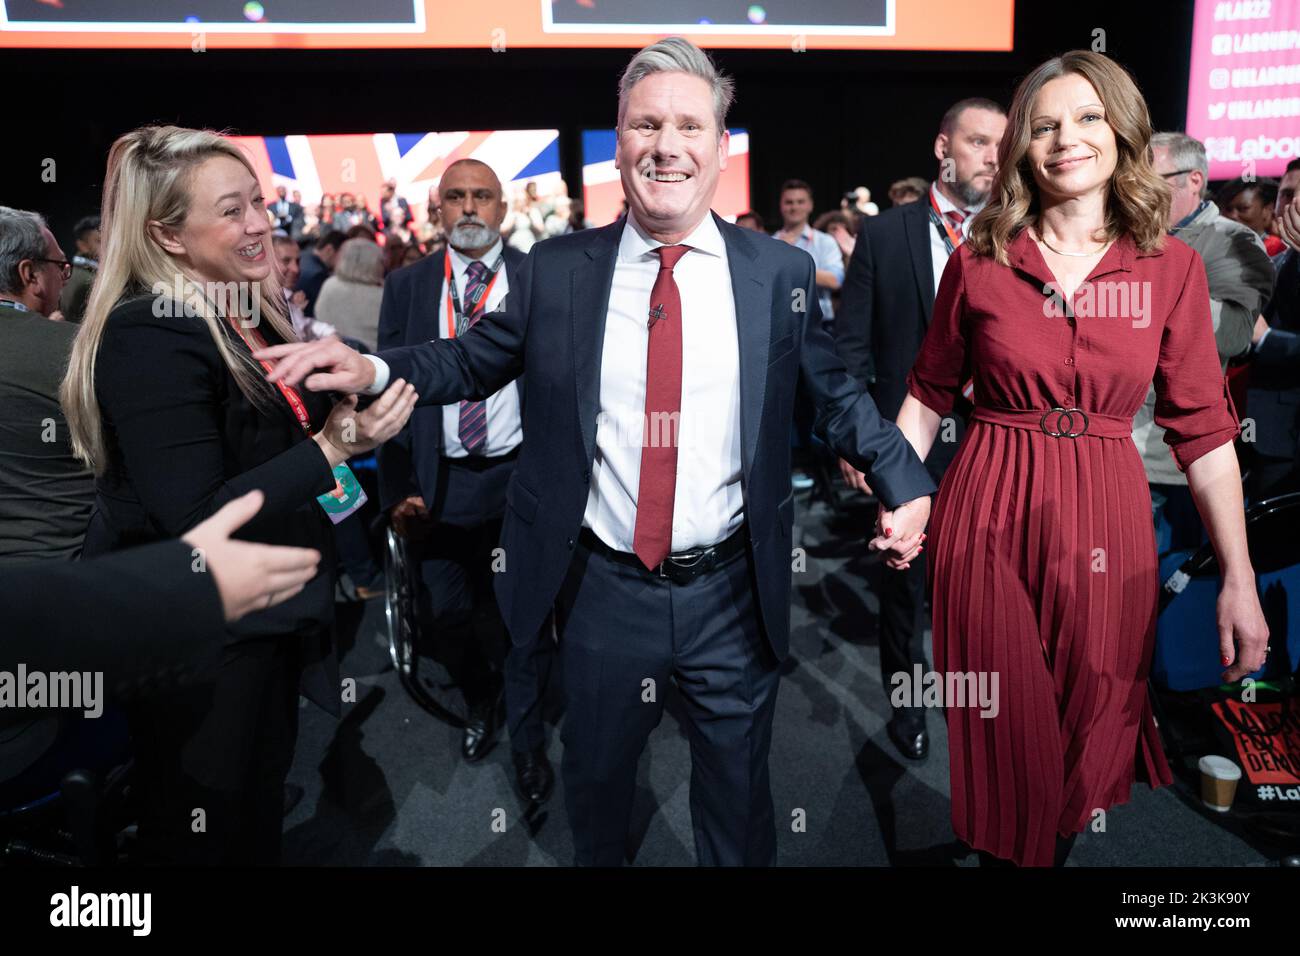 Labour Party leader Sir Keir Starmer, with his wife Victoria, leaves the stage after giving his keynote address during the Labour Party Conference at the ACC Liverpool. Picture date: Tuesday September 27, 2022. Stock Photo